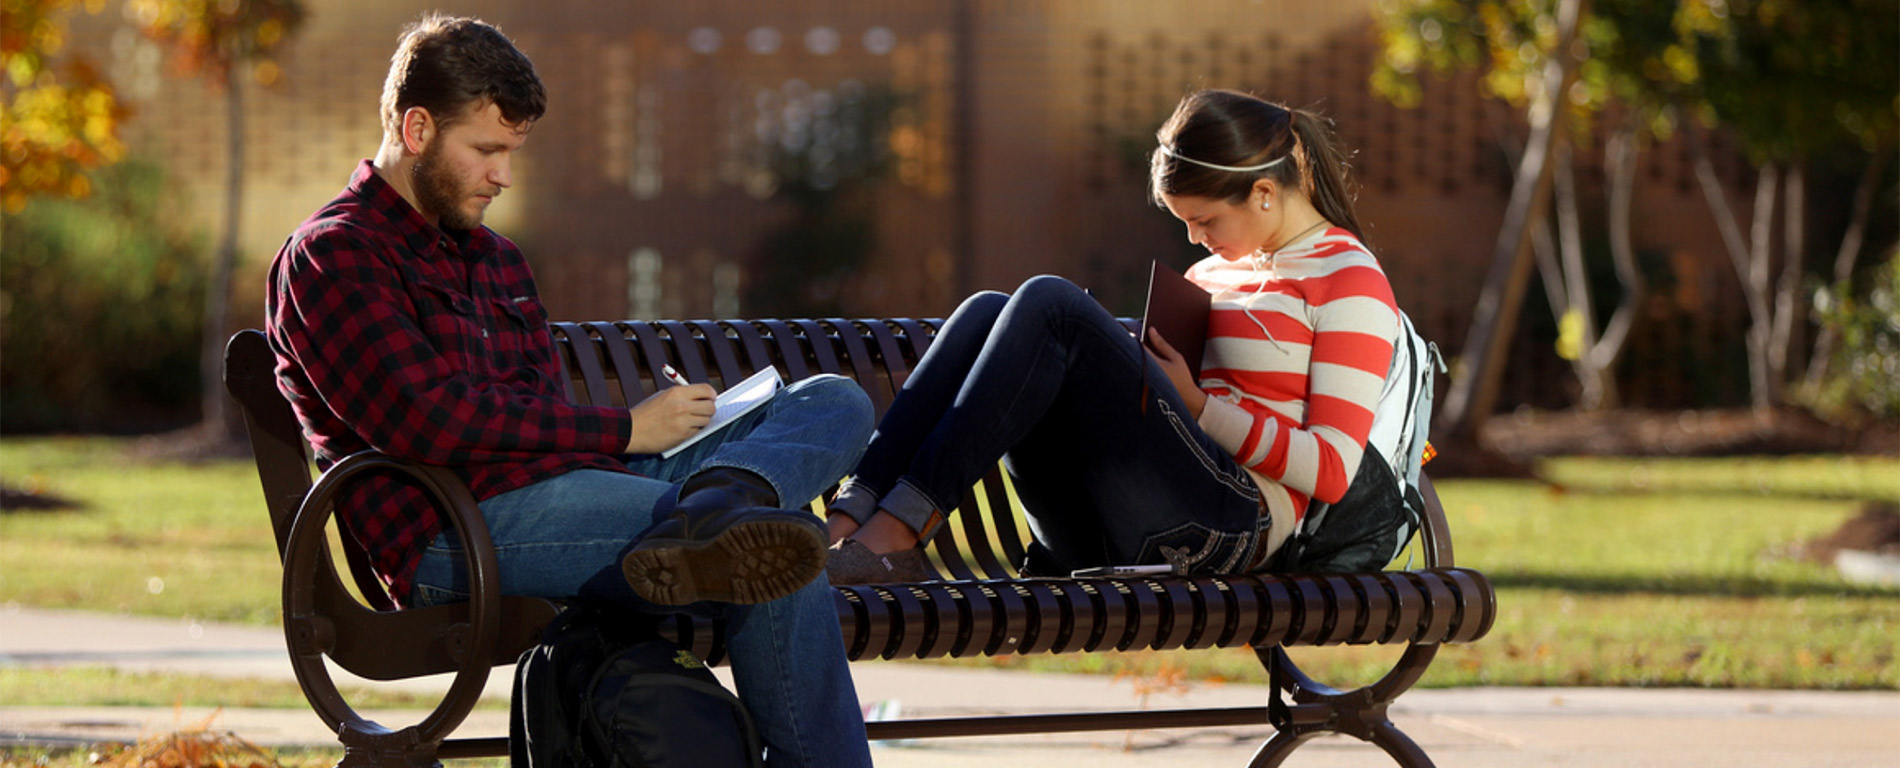 students on park bench studying